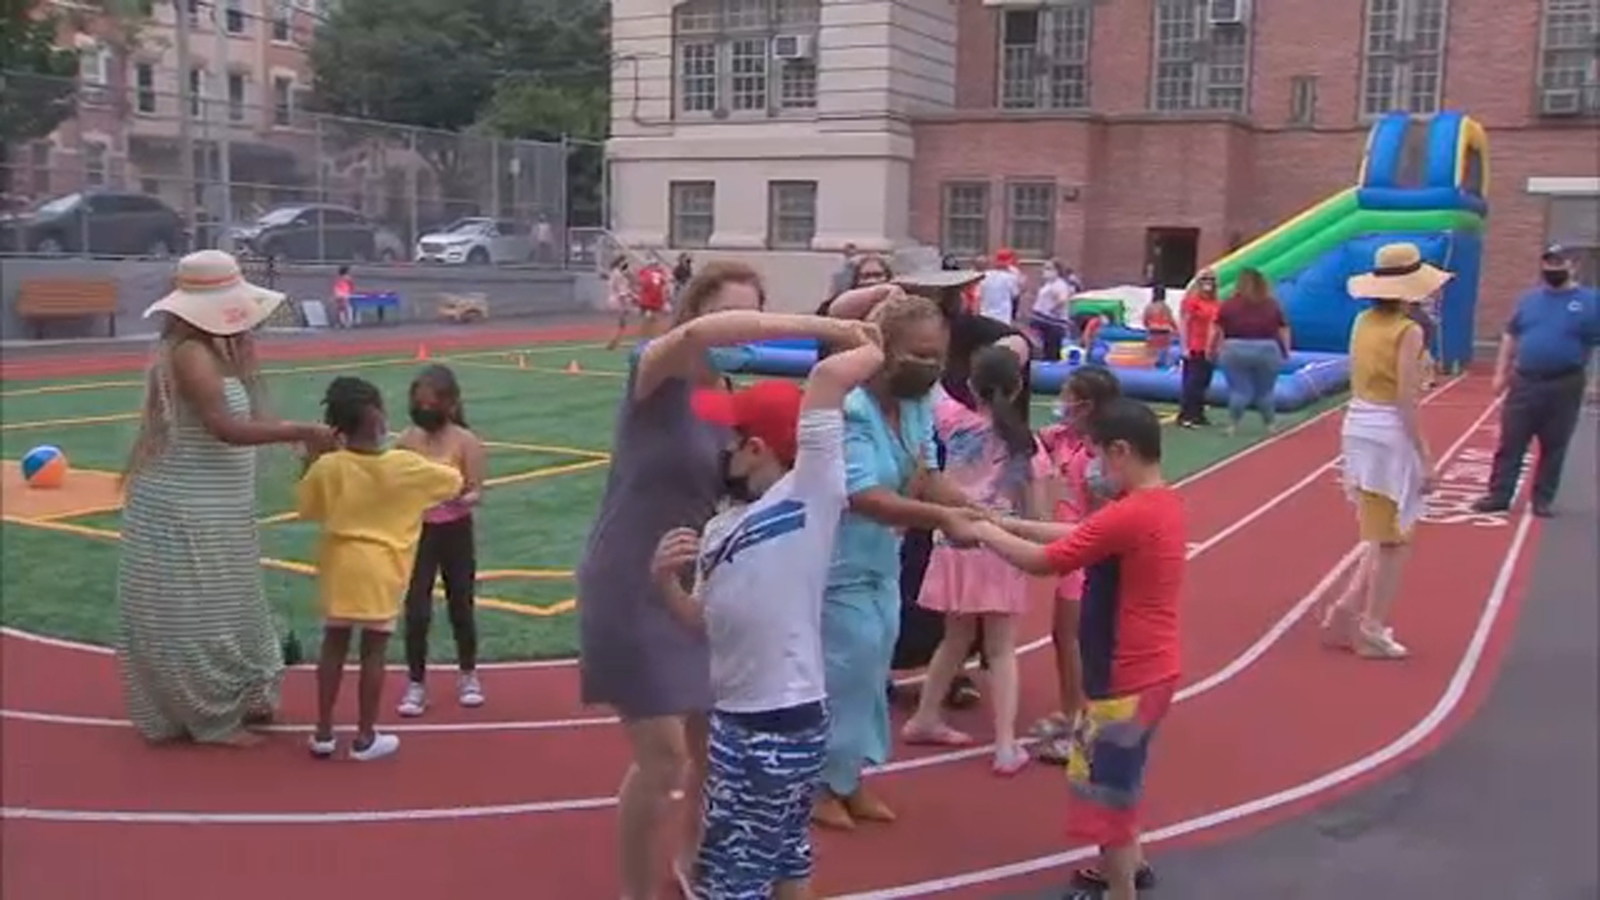 New York City Summer School: First day of ‘Summer Rising’ kicks off for students [Video]